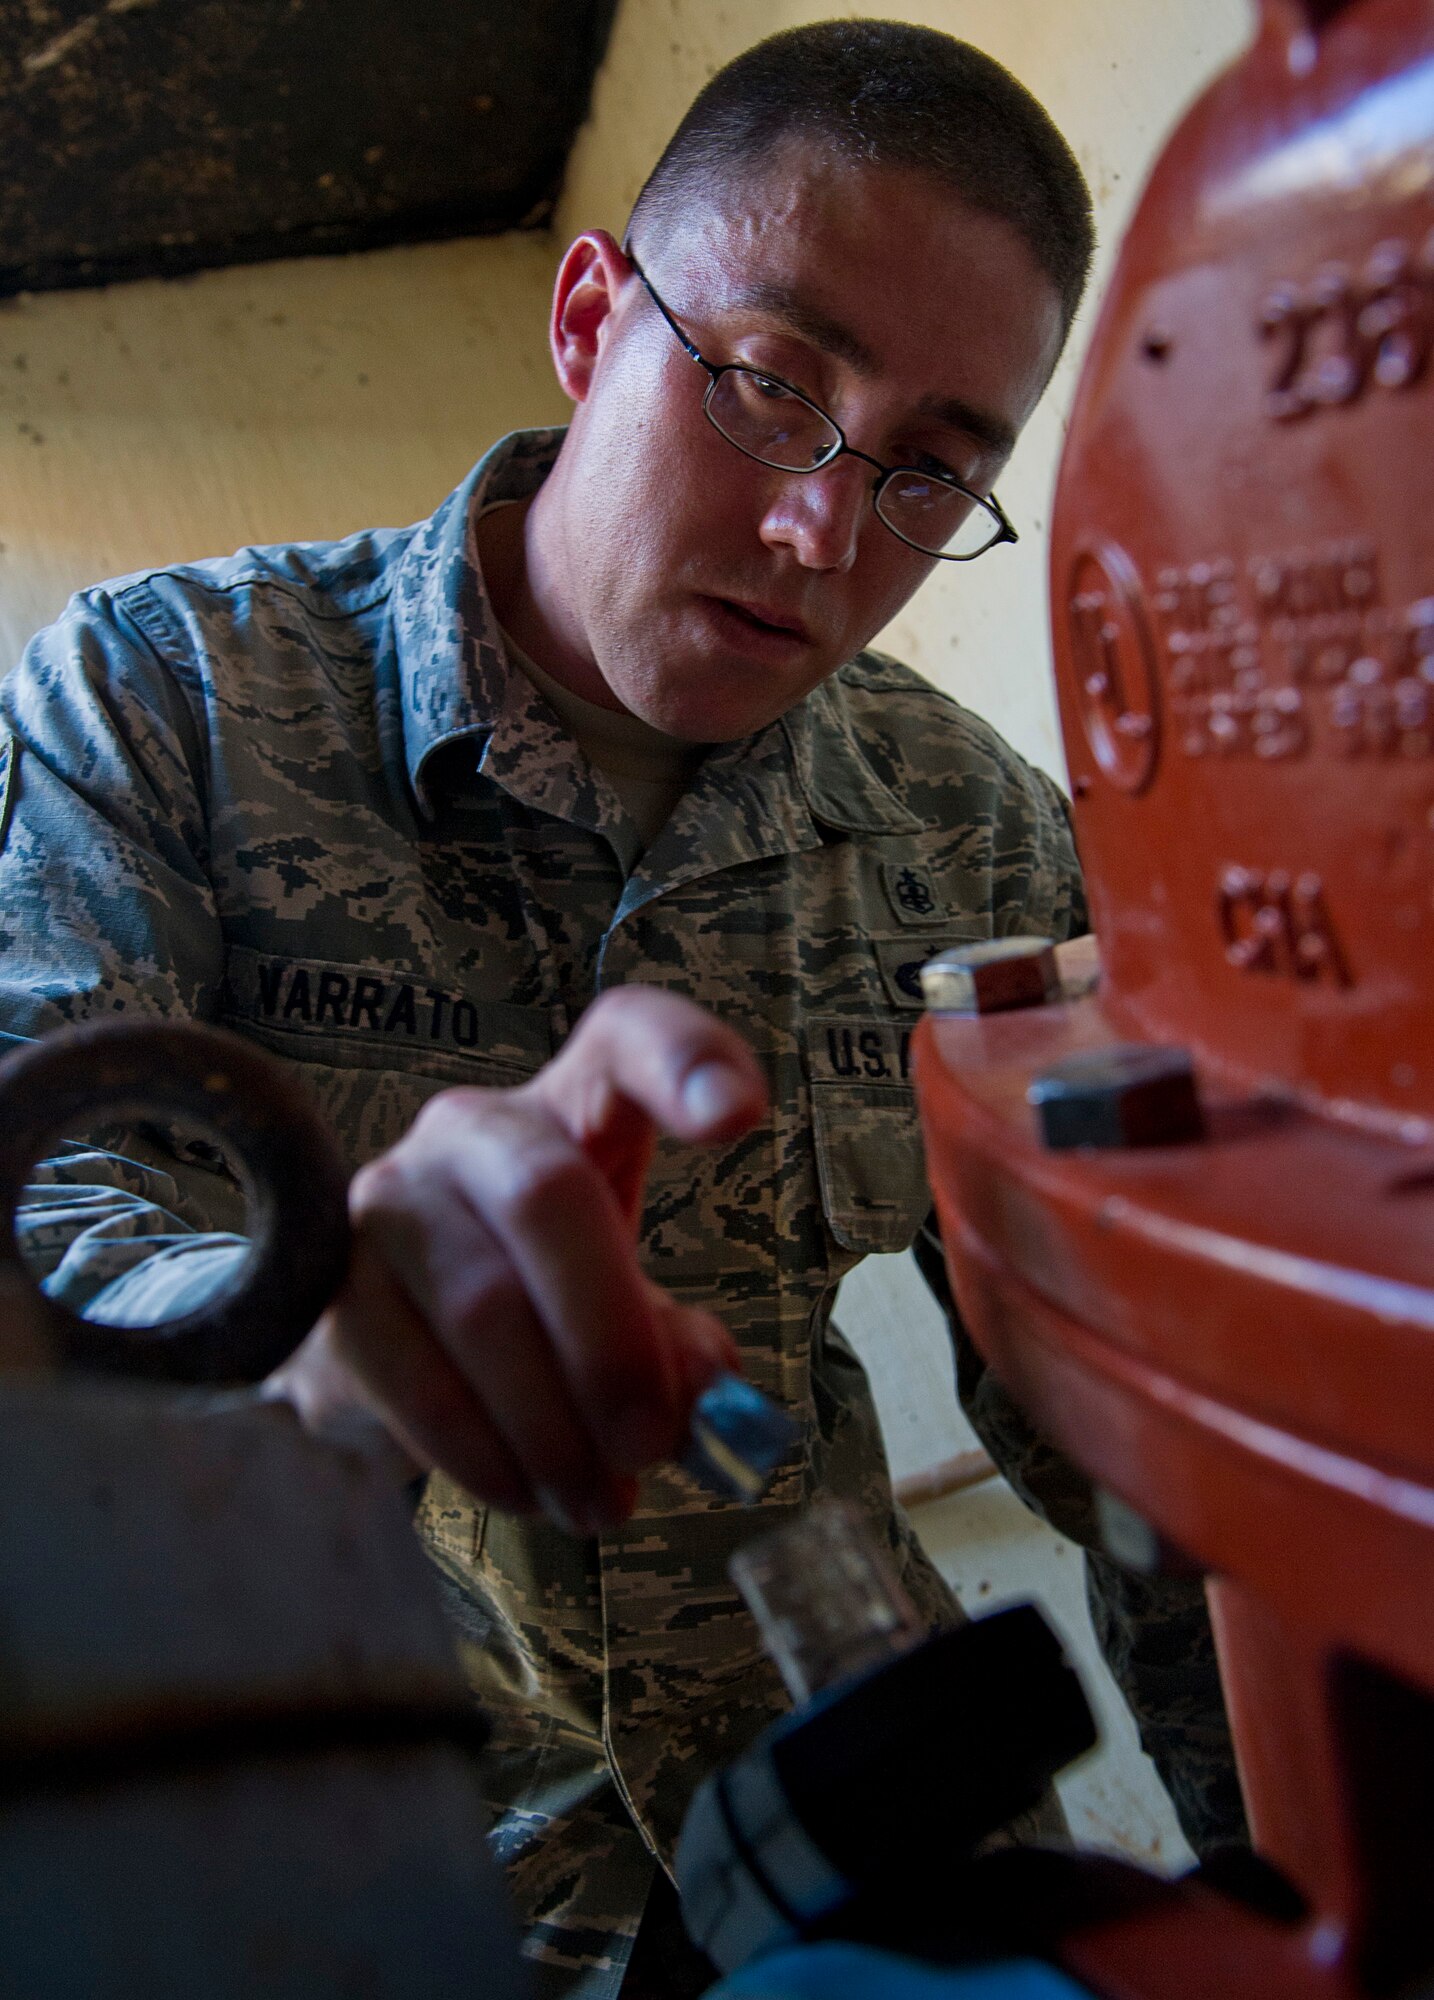 ALTUS AIR FORCE BASE, Okla. -- Staff Sgt. Marshall Varrato, 97th Medical Operations Squadron bioenvironmental engineering NCO in charge of readiness and training, adds a chlorine agent to a water sample during a routine water sampling at the main water line on base. The chlorine agent tests for residual chlorine in the water. Members of the 97th MDOS bioenvironmental engineering flight conduct water samplings twice a month. (U.S. Air Force photo by Senior Airman Kenneth W. Norman / Released)